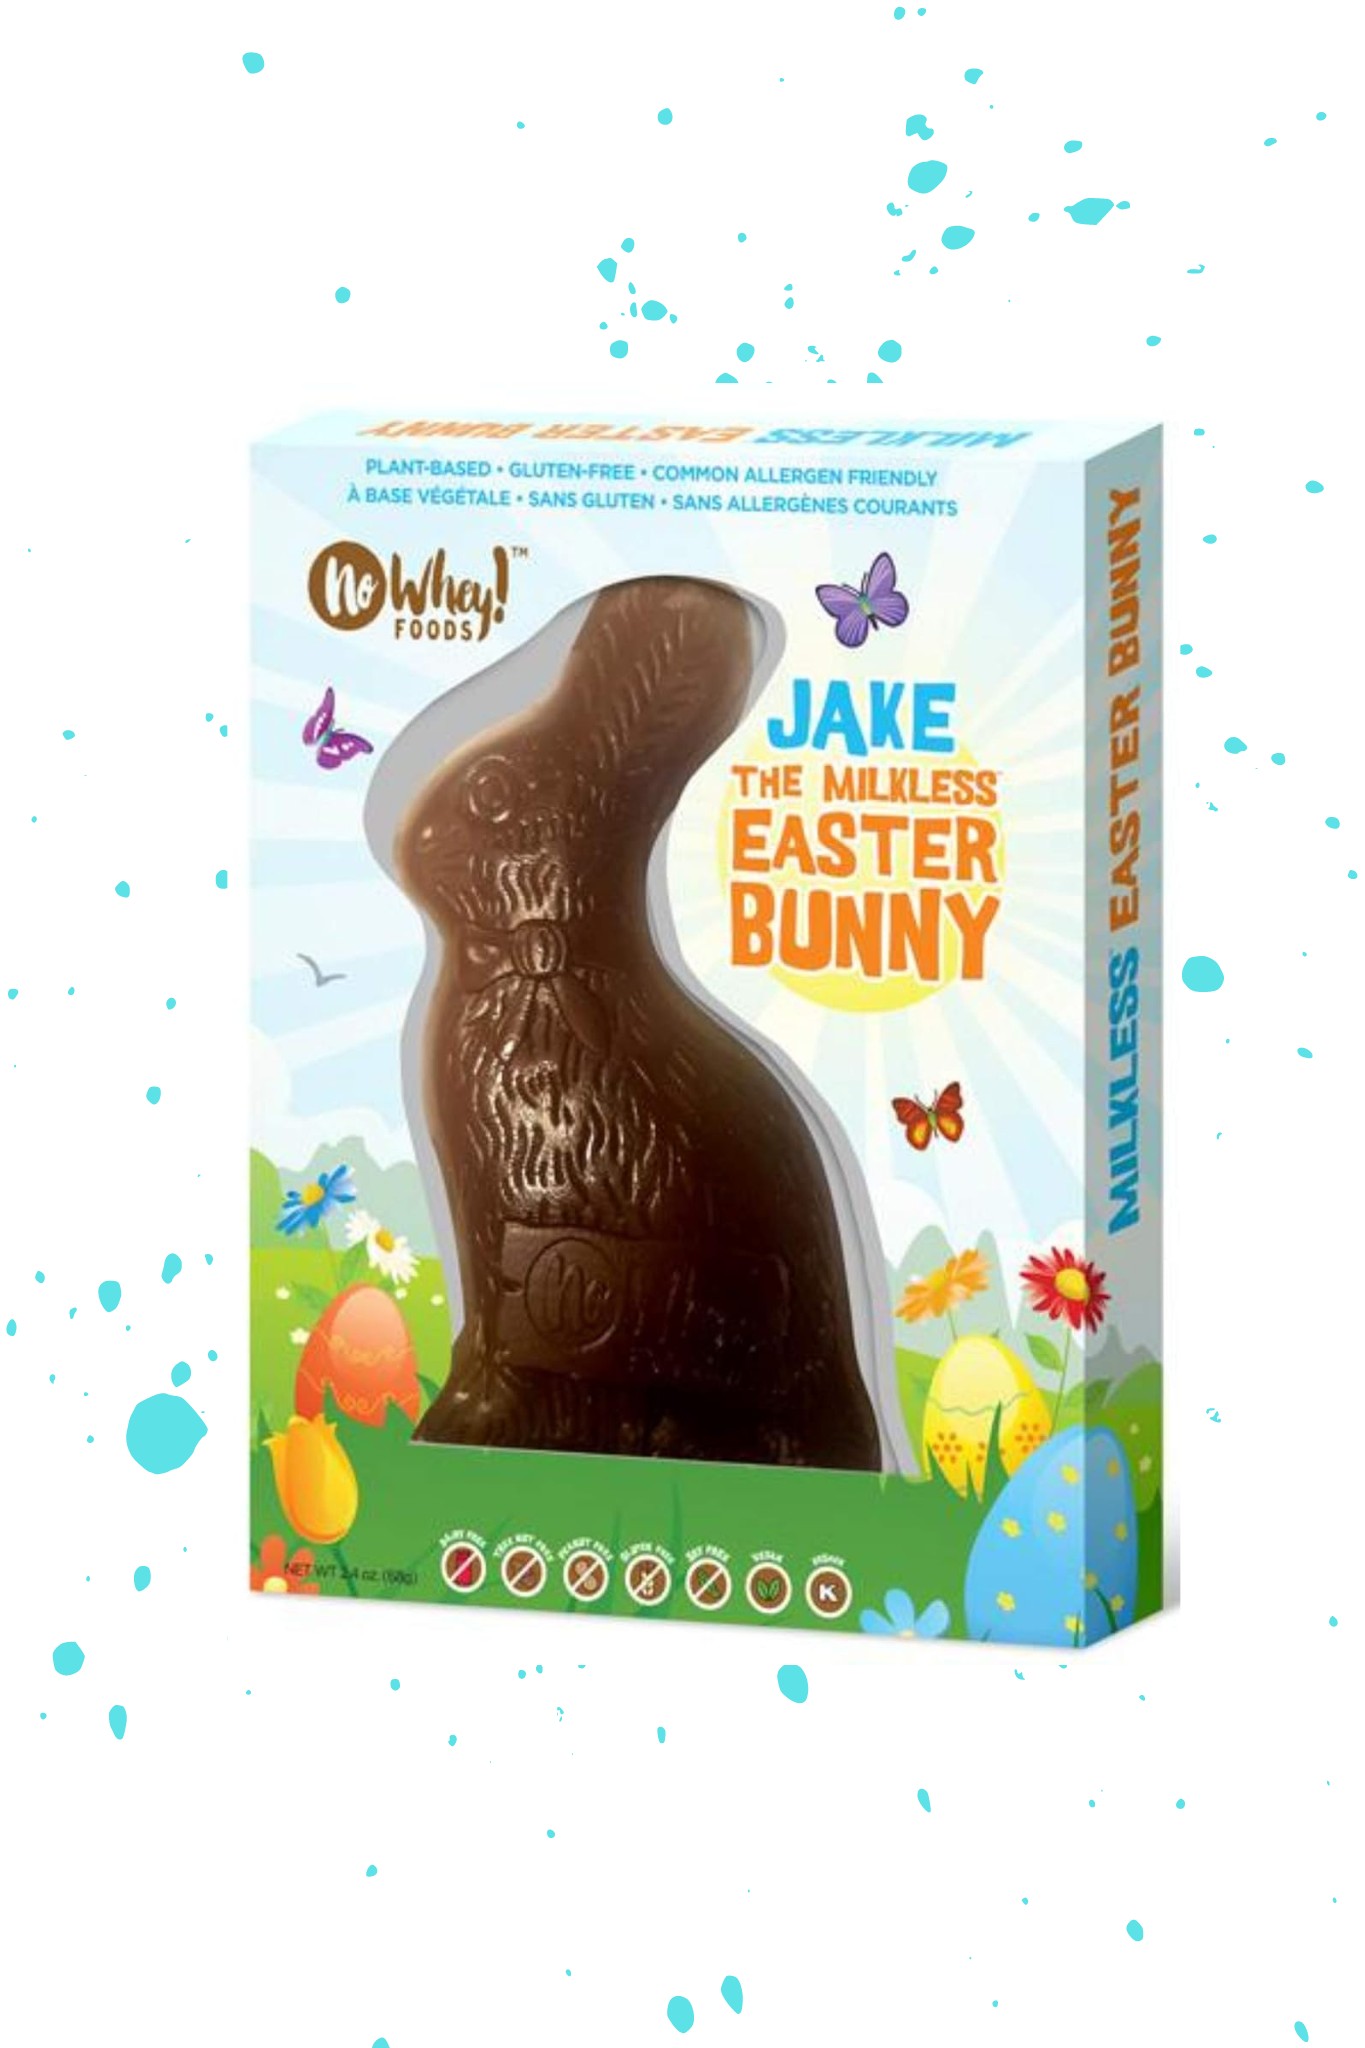 A No Whey Jake Easter chocolate bunny in a box.